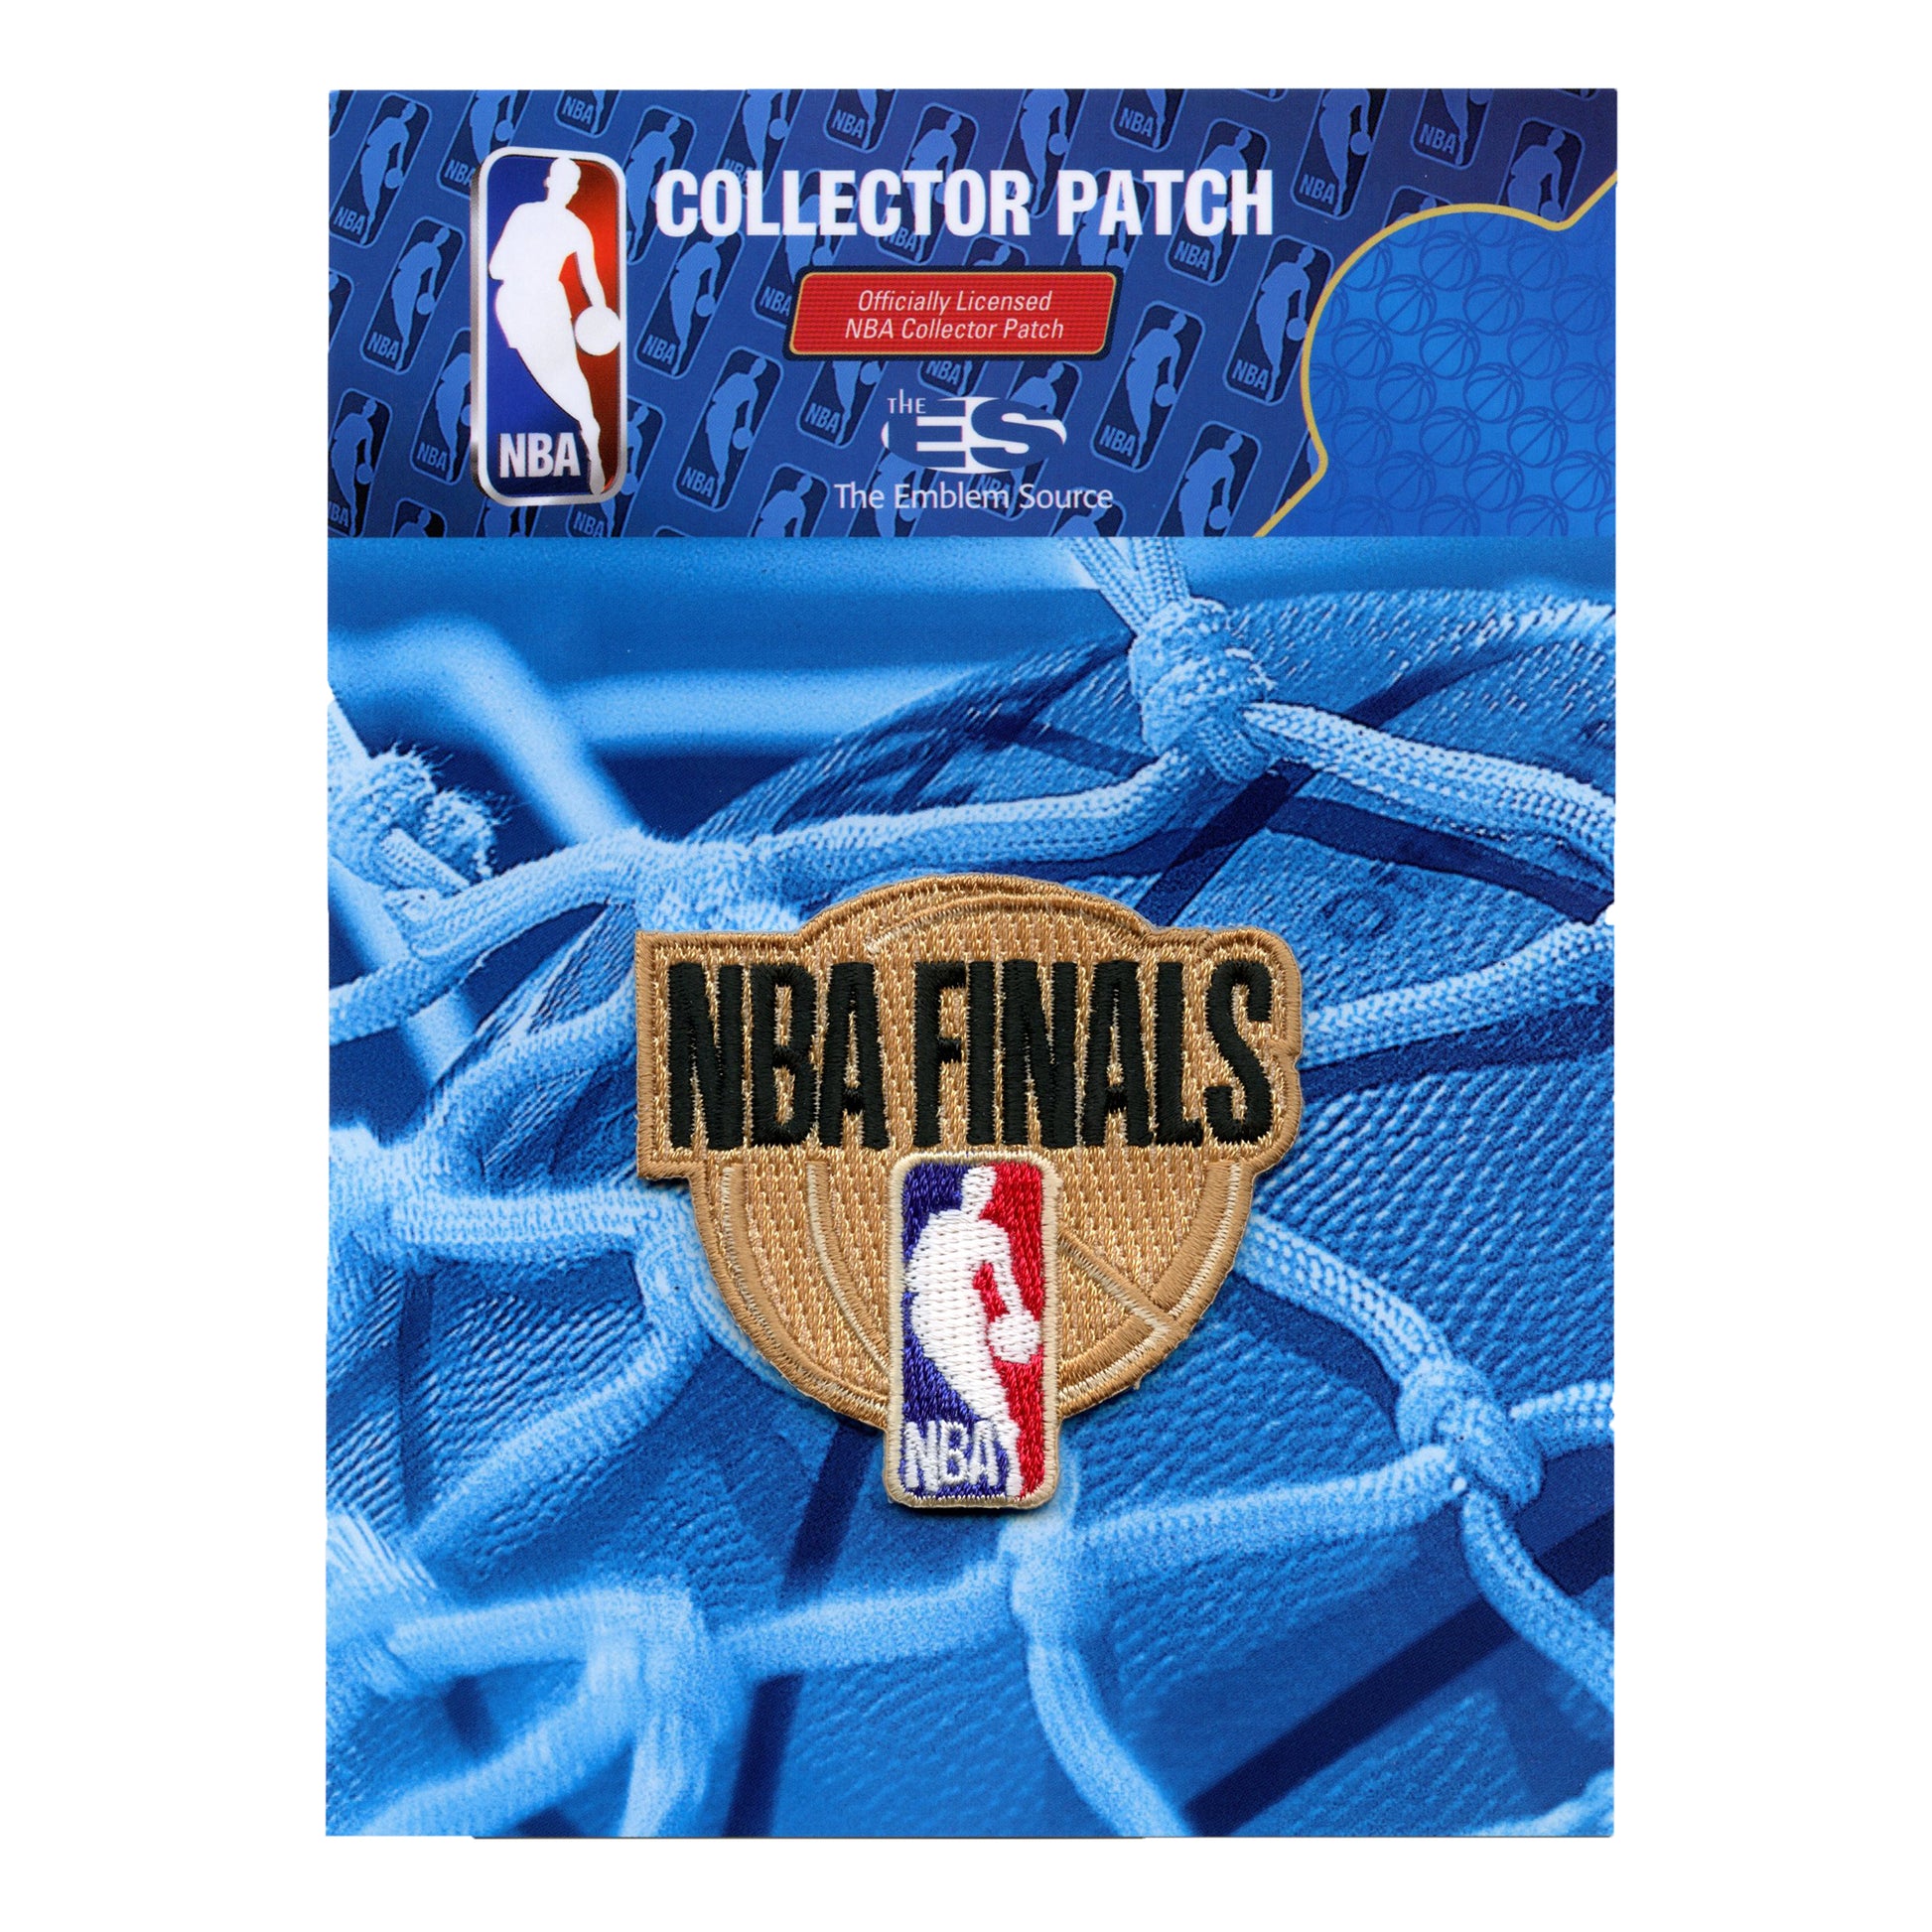 Men's New Era Black/Royal Golden State Warriors 2018 NBA Finals Champions  Side Patch Two-Tone